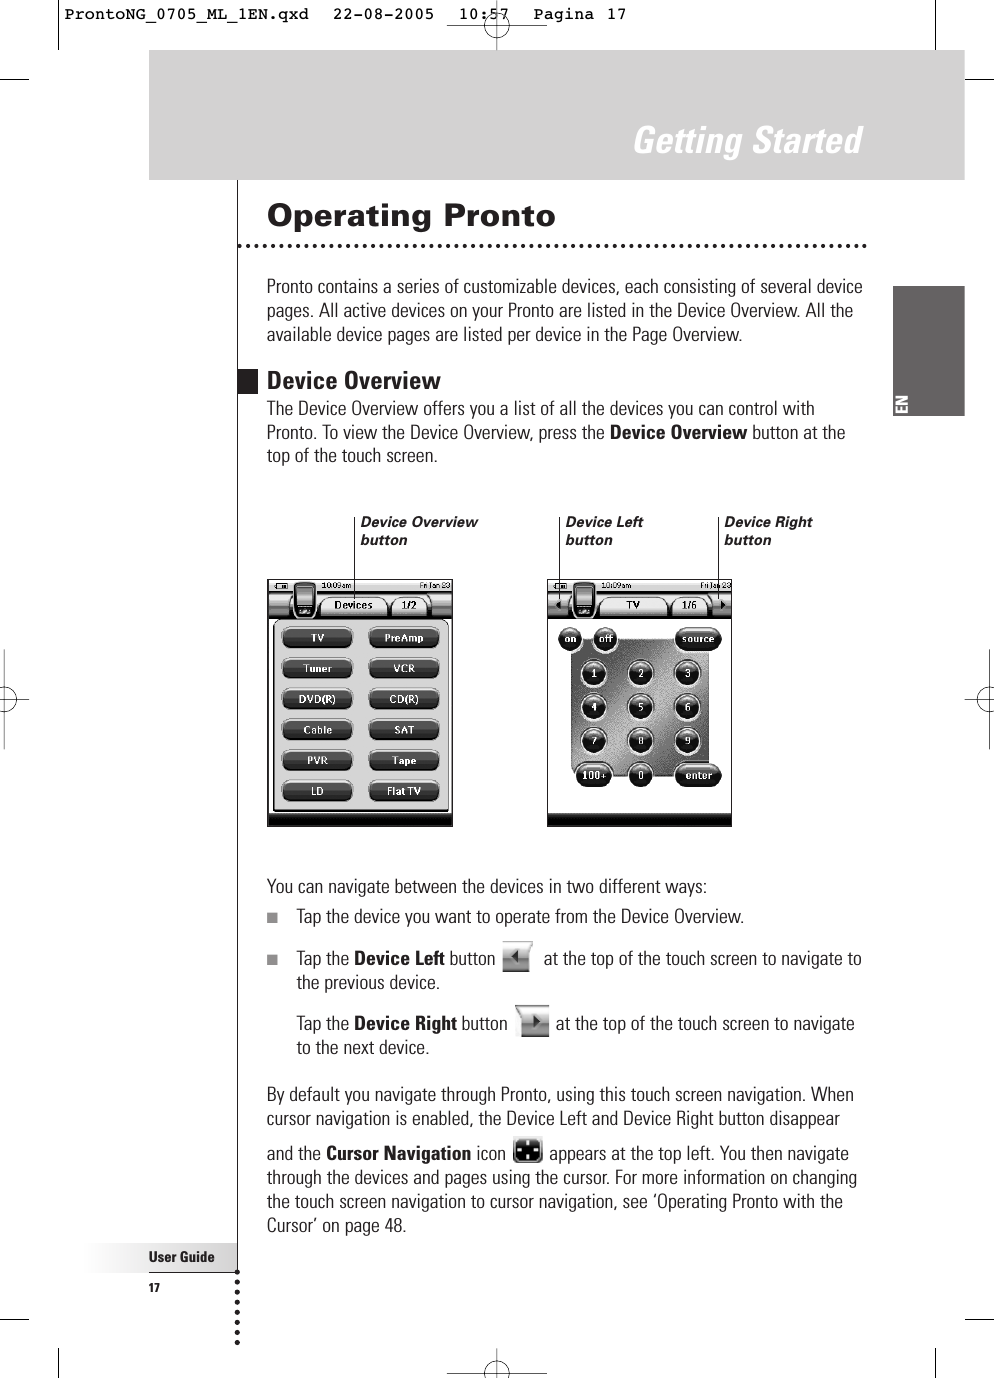 User Guide17ENGetting StartedOperating ProntoPronto contains a series of customizable devices, each consisting of several devicepages. All active devices on your Pronto are listed in the Device Overview. All theavailable device pages are listed per device in the Page Overview.Device OverviewThe Device Overview offers you a list of all the devices you can control with Pronto. To view the Device Overview, press the Device Overview button at thetop of the touch screen.You can navigate between the devices in two different ways:■Tap the device you want to operate from the Device Overview.■Tap the Device Left button  at the top of the touch screen to navigate tothe previous device.Tap the Device Right button  at the top of the touch screen to navigateto the next device.By default you navigate through Pronto, using this touch screen navigation. Whencursor navigation is enabled, the Device Left and Device Right button disappearand the Cursor Navigation icon appears at the top left. You then navigatethrough the devices and pages using the cursor. For more information on changingthe touch screen navigation to cursor navigation, see ‘Operating Pronto with theCursor’ on page 48.Device RightbuttonDevice LeftbuttonDevice OverviewbuttonProntoNG_0705_ML_1EN.qxd  22-08-2005  10:57  Pagina 17